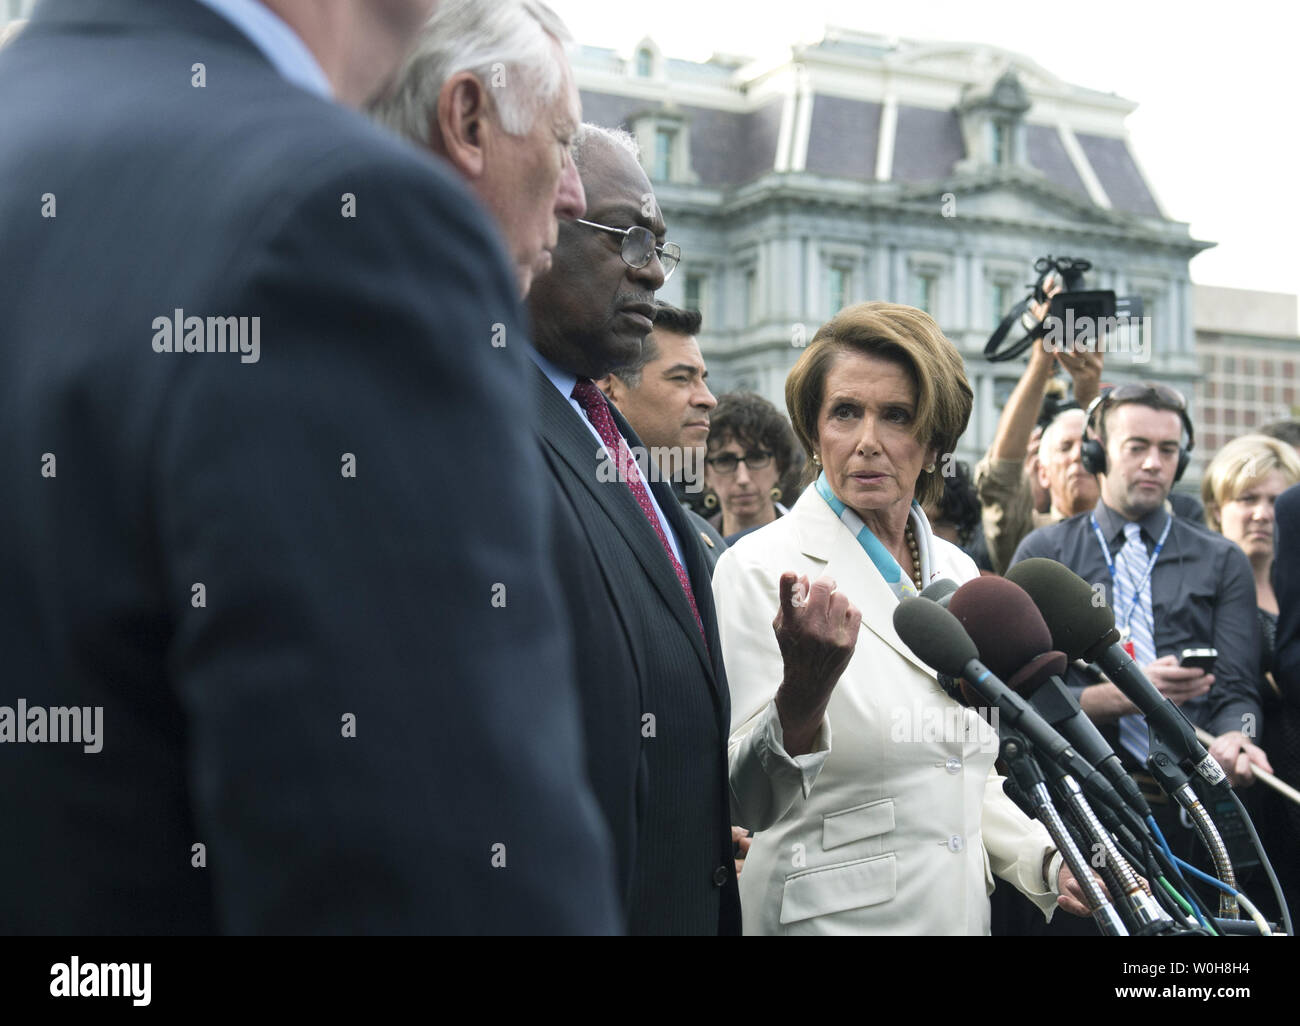 House Minority Leader Nancy Pelosi (D-CA) speaks to the media following a meeting with President Barack Obama on the debt limit and reopening the government at the White House in Washington, D.C. on October 15, 2013. Pelosi was joined by House Minority Whip Steny Hoyer (D-MD) (L), Rep. Jame Clyburn (R-SC) and Rep. Xavier Becerra (D-CA). UPI/Kevin Dietsch Stock Photo